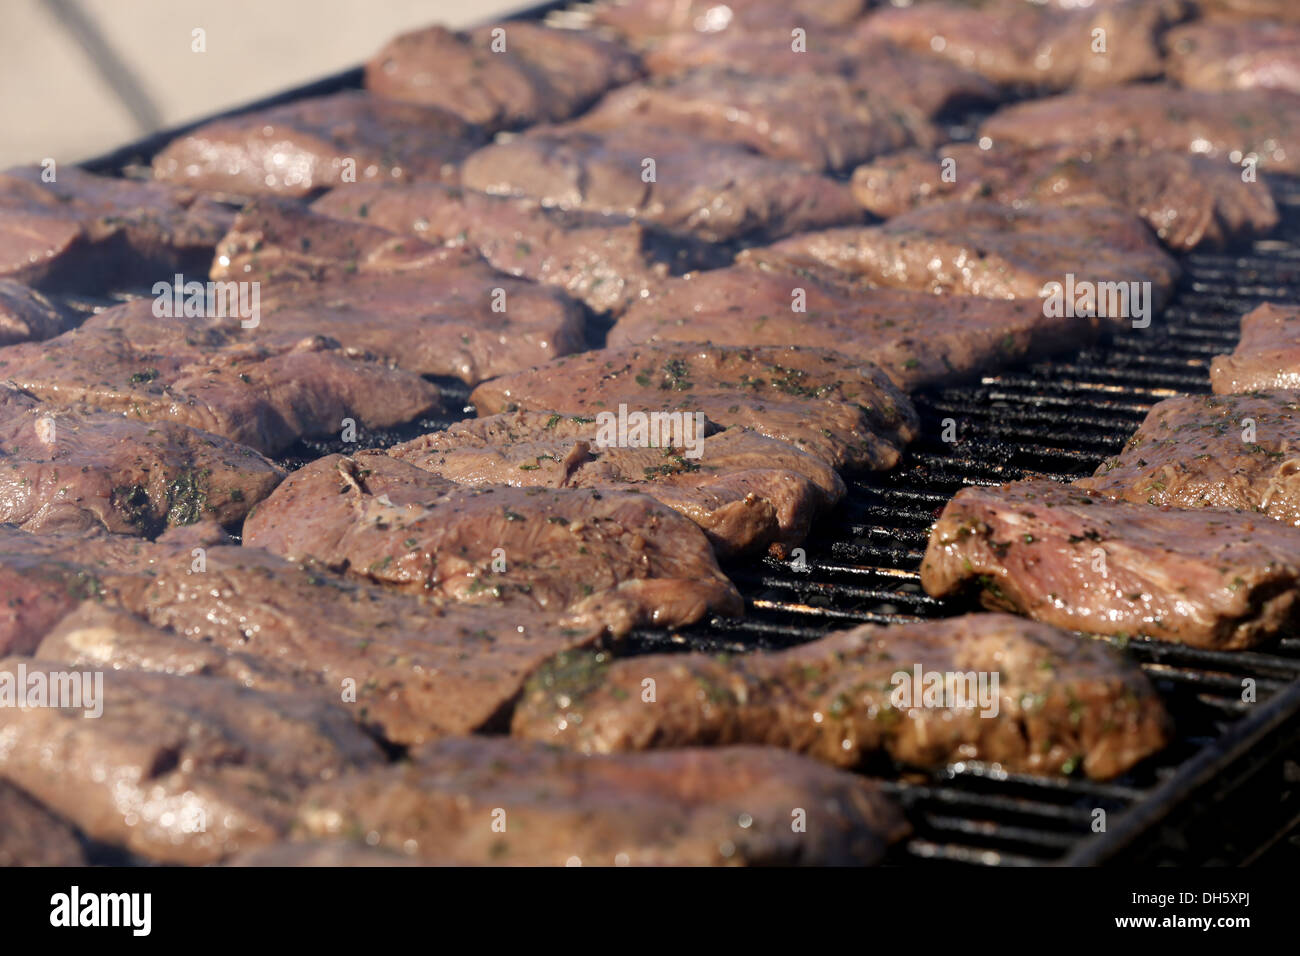 MARINE CORPS AIR STATION YUMA, Ariz. – Marines with 1st Battalion, 7th Marine Regiment, grill steaks for a warriors’ meal here, Stock Photo